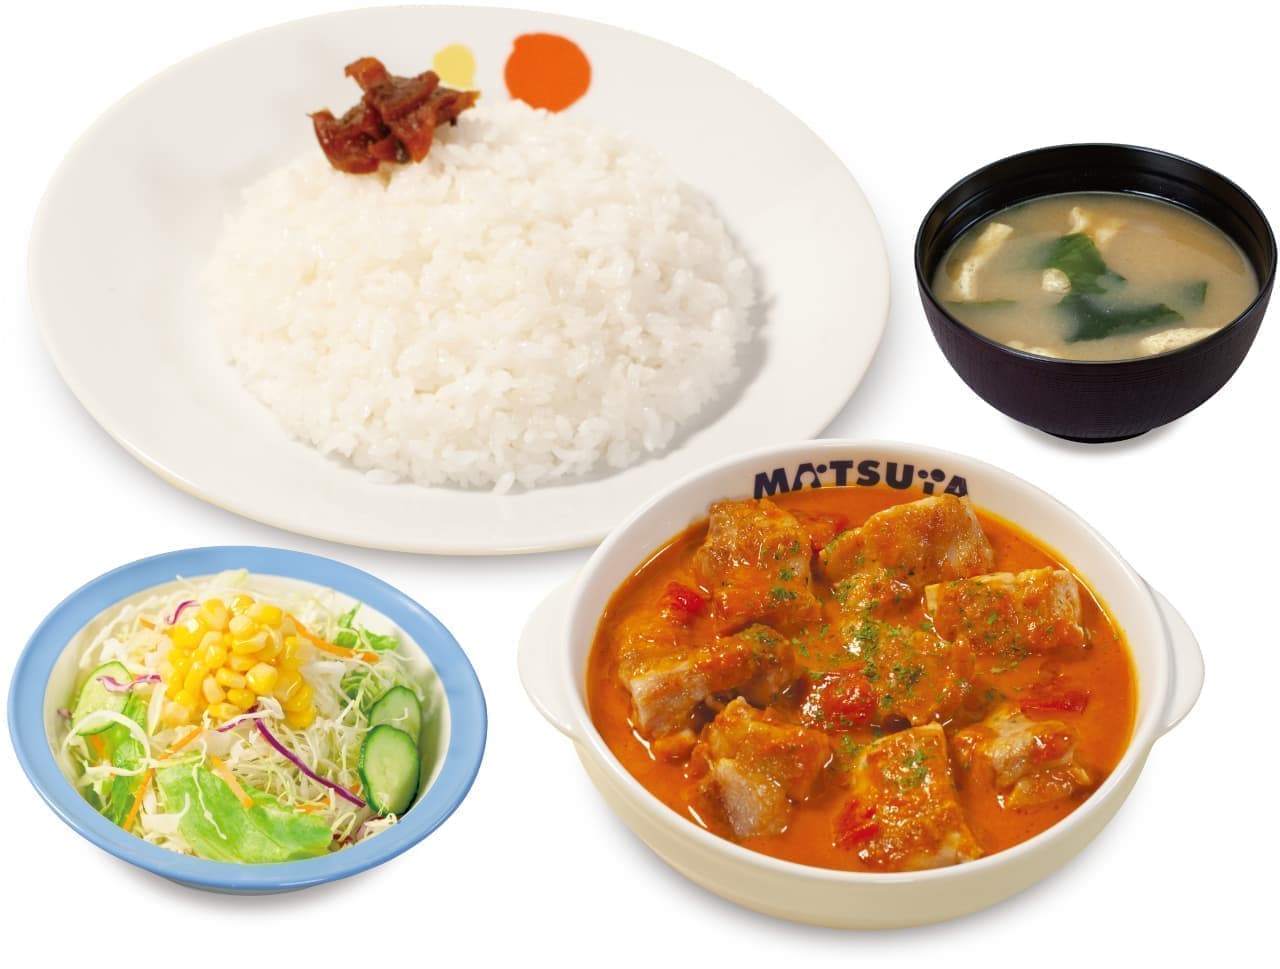 Matsuya "Butter Chicken Curry with Raw Vegetables Set